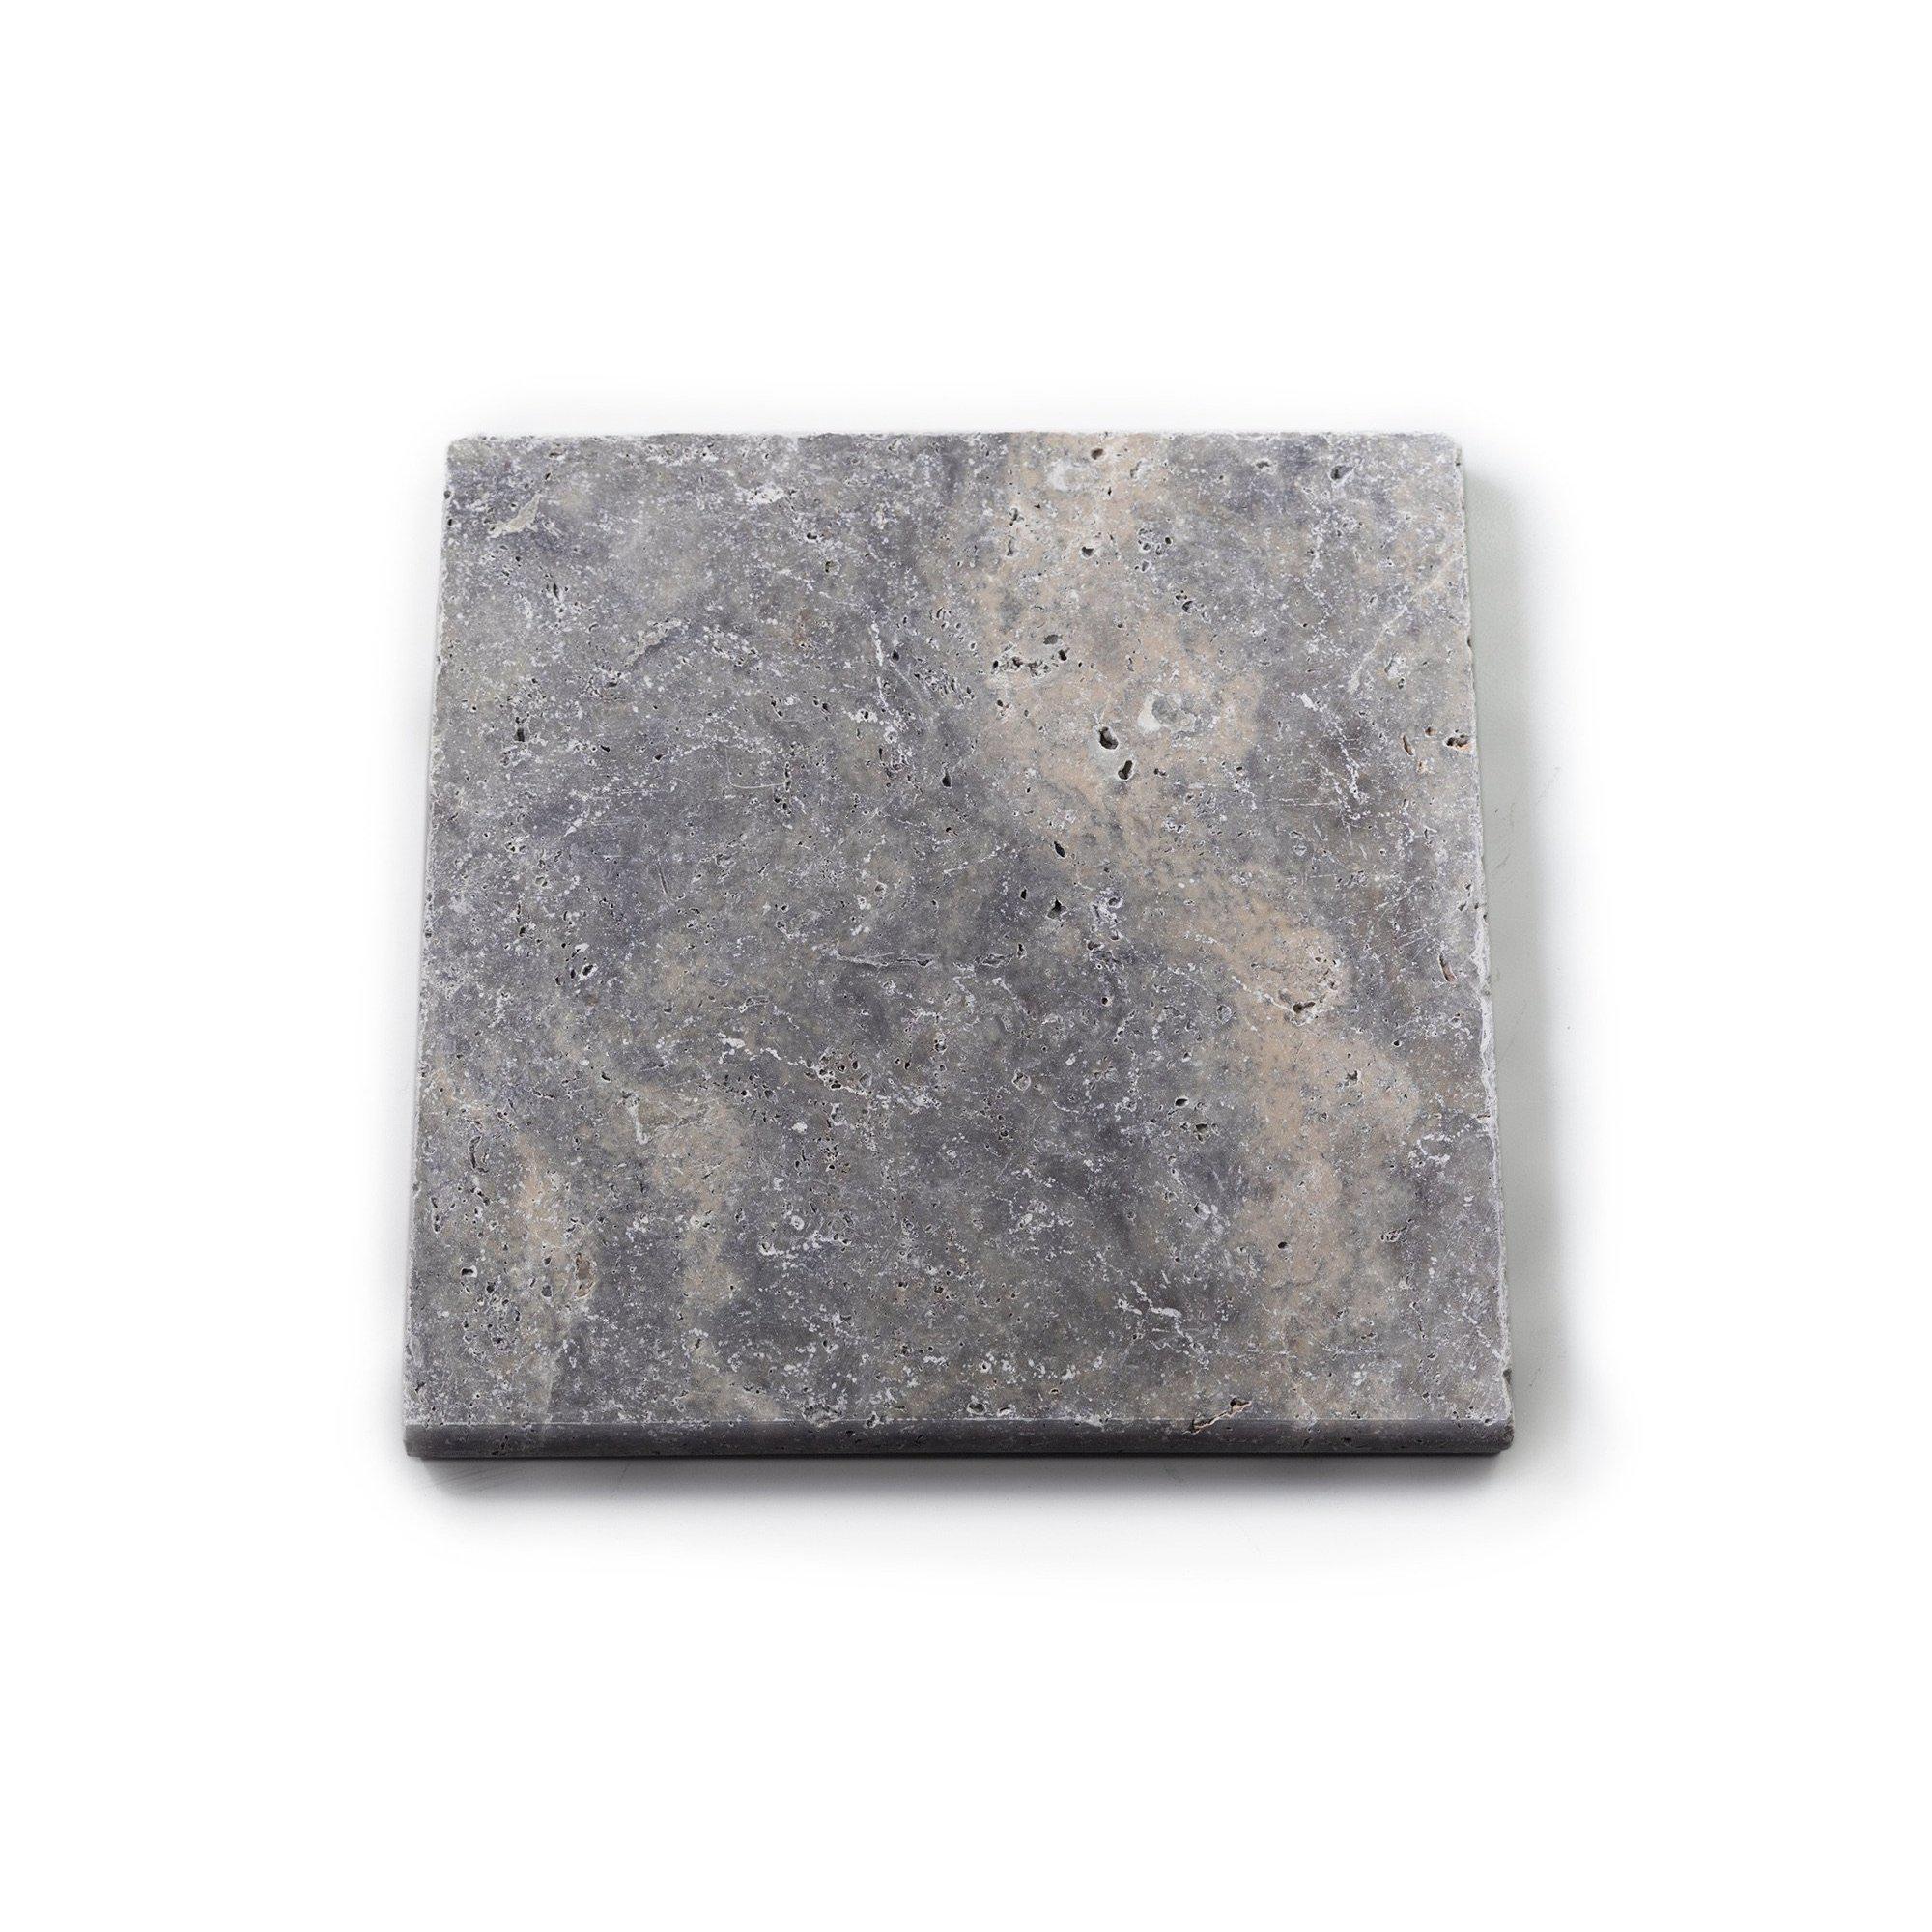 Tumbled Travertine Tile & Paver - French Set 30mm - Premium Silver Stone and Rock